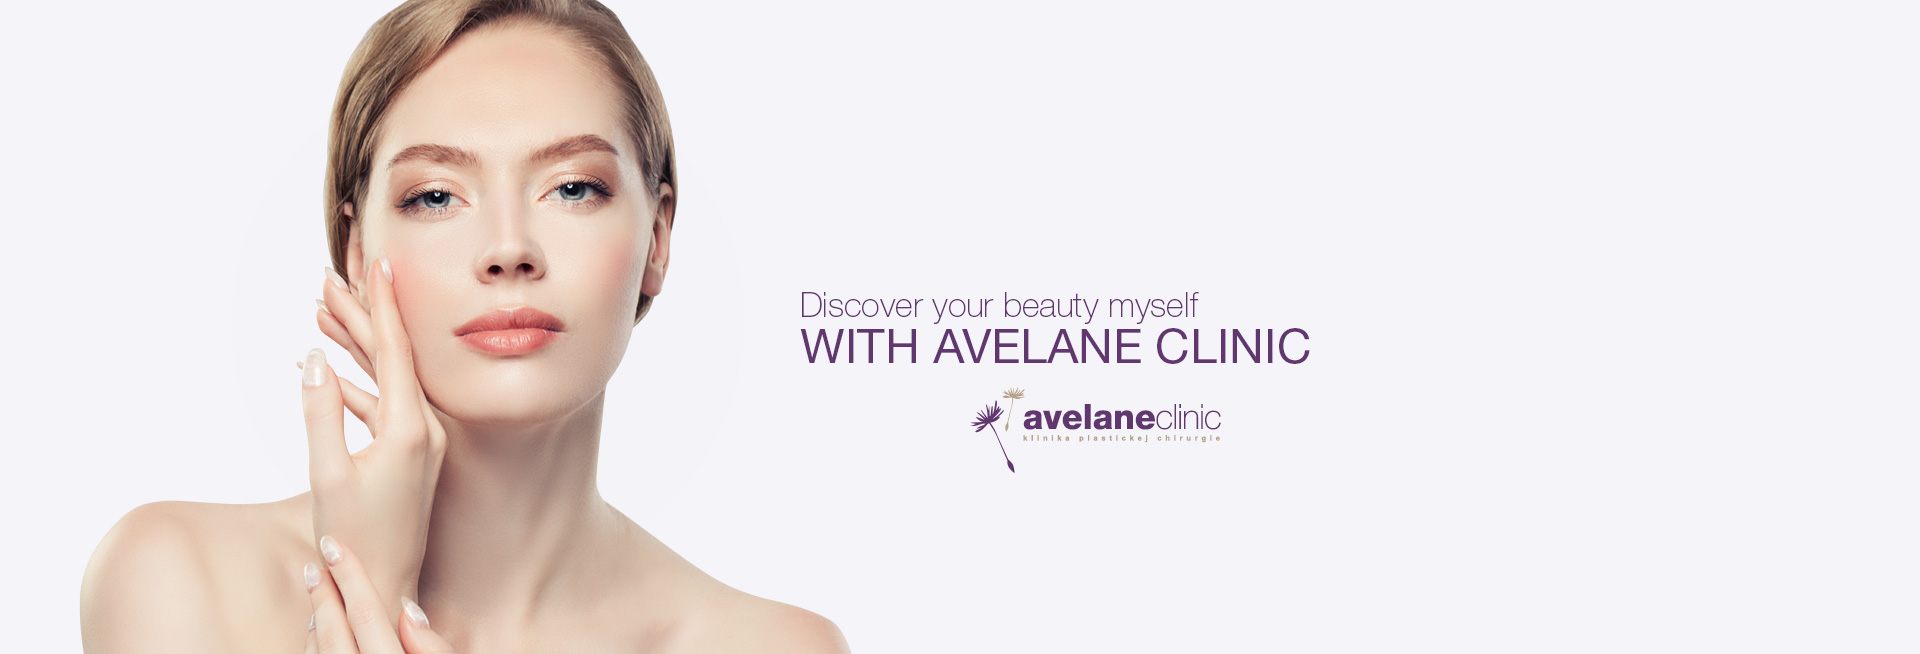 Discover your beauty myself
with avelane clinic